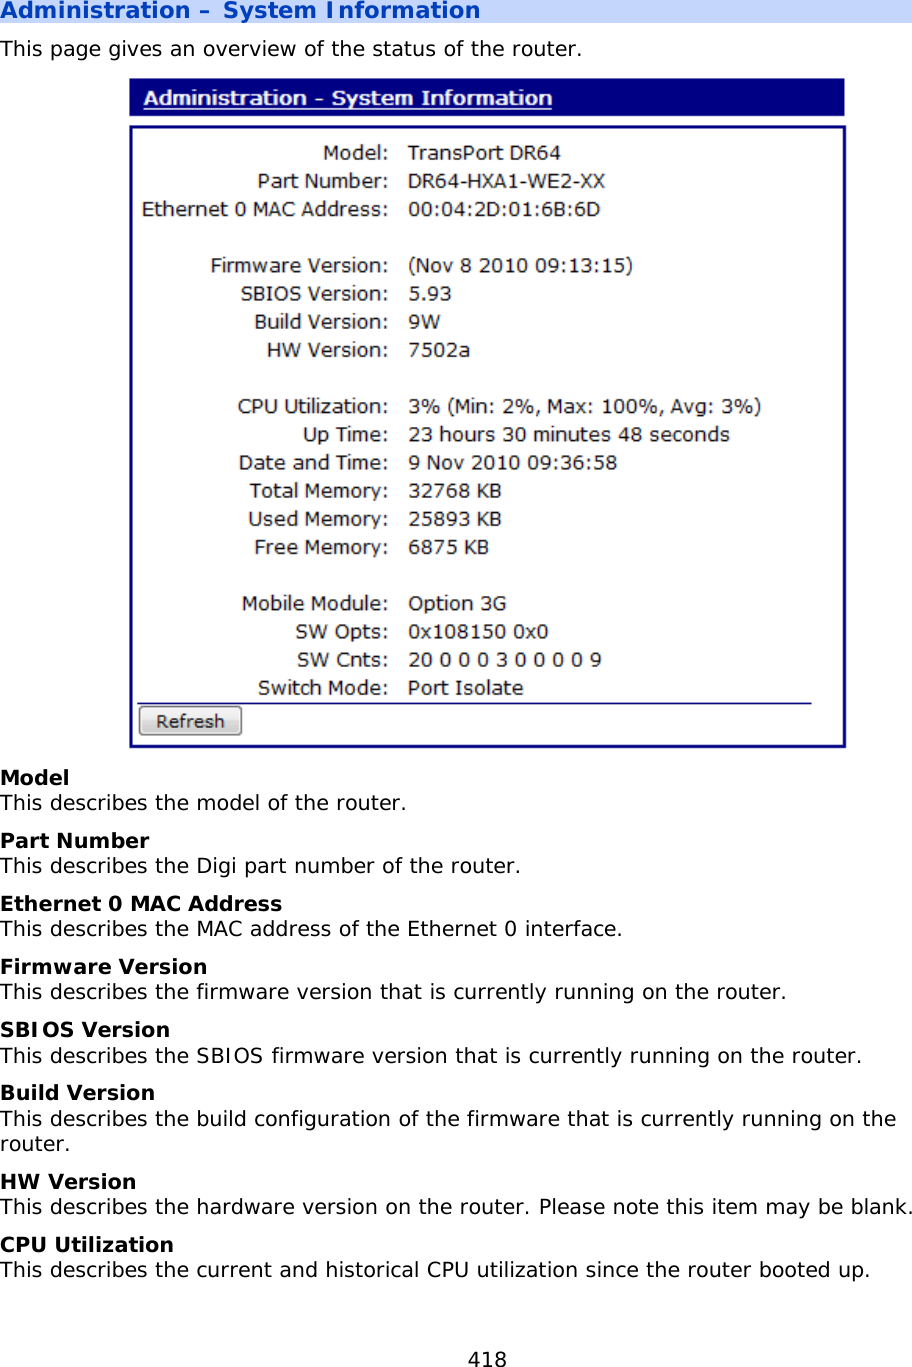 418  Administration – System Information This page gives an overview of the status of the router.  Model This describes the model of the router. Part Number This describes the Digi part number of the router. Ethernet 0 MAC Address This describes the MAC address of the Ethernet 0 interface. Firmware Version This describes the firmware version that is currently running on the router. SBIOS Version This describes the SBIOS firmware version that is currently running on the router. Build Version This describes the build configuration of the firmware that is currently running on the router. HW Version This describes the hardware version on the router. Please note this item may be blank. CPU Utilization This describes the current and historical CPU utilization since the router booted up.    